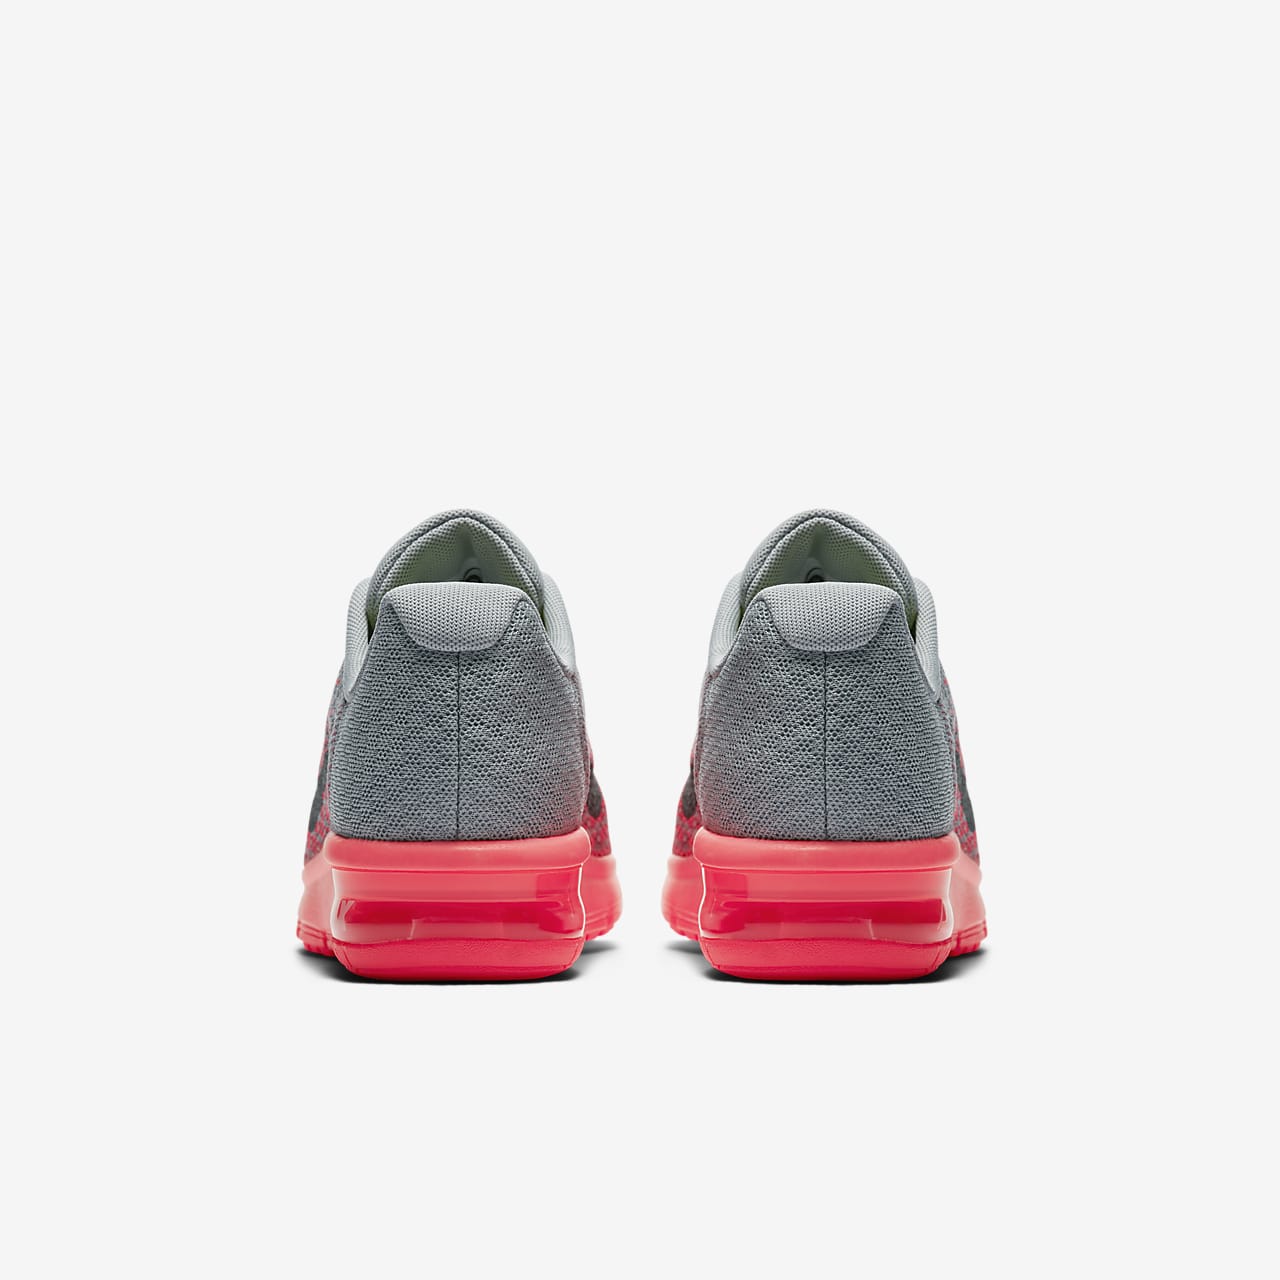 nike air max sequent 2 grade school boys' sneakers